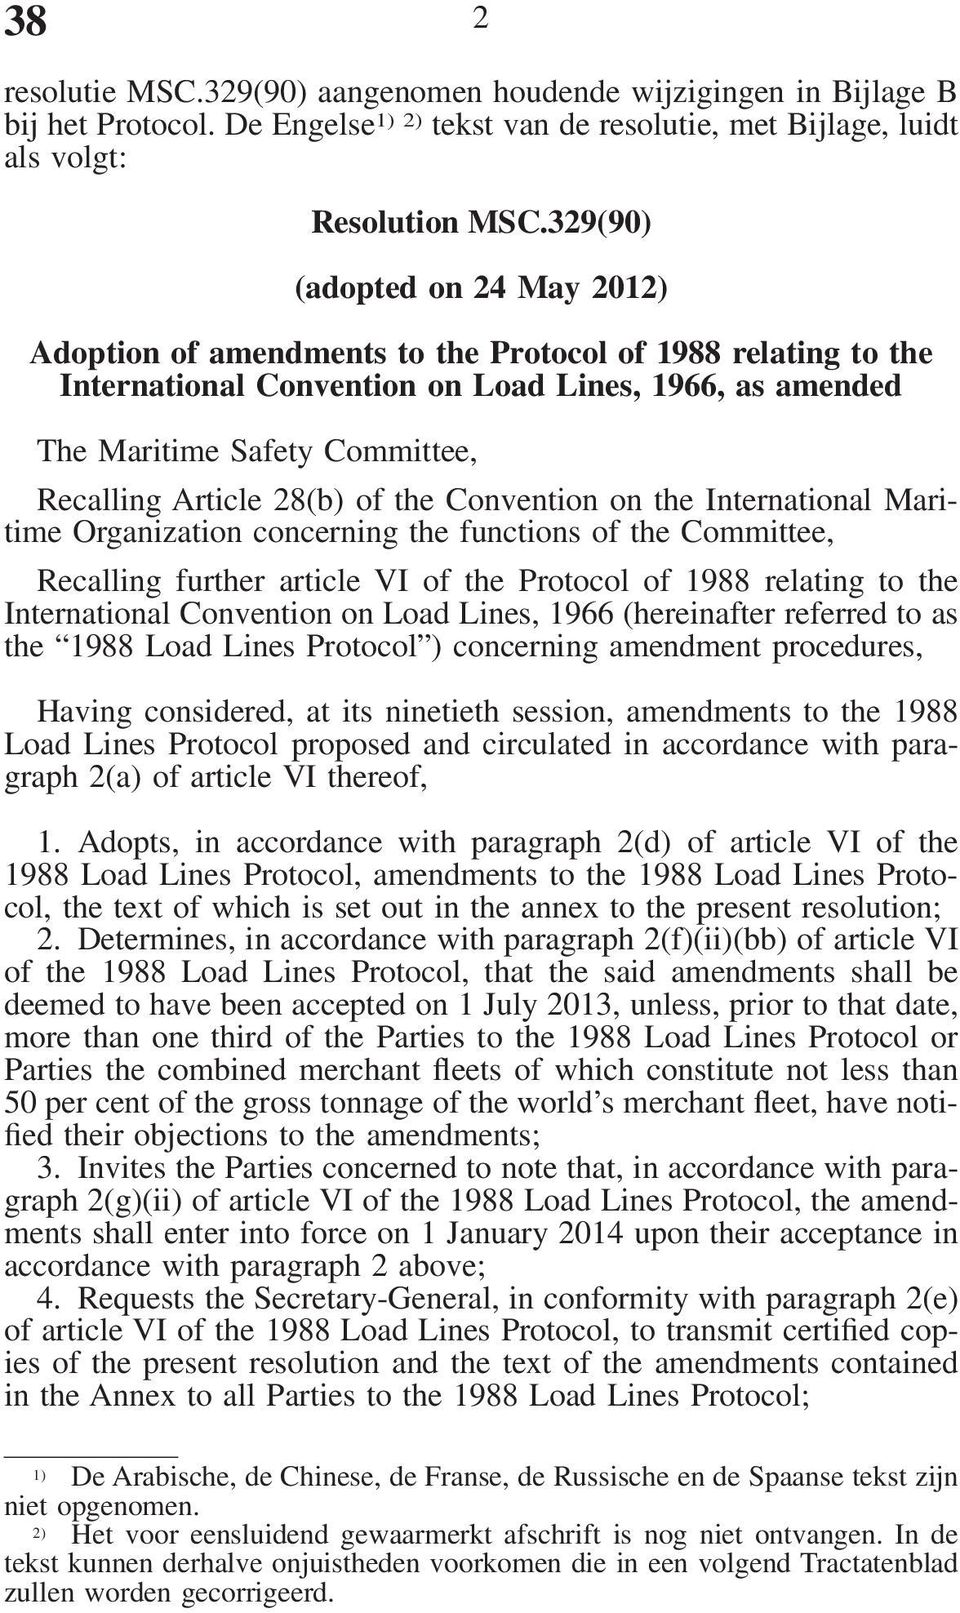 Article 28(b) of the Convention on the International Maritime Organization concerning the functions of the Committee, Recalling further article VI of the Protocol of 1988 relating to the